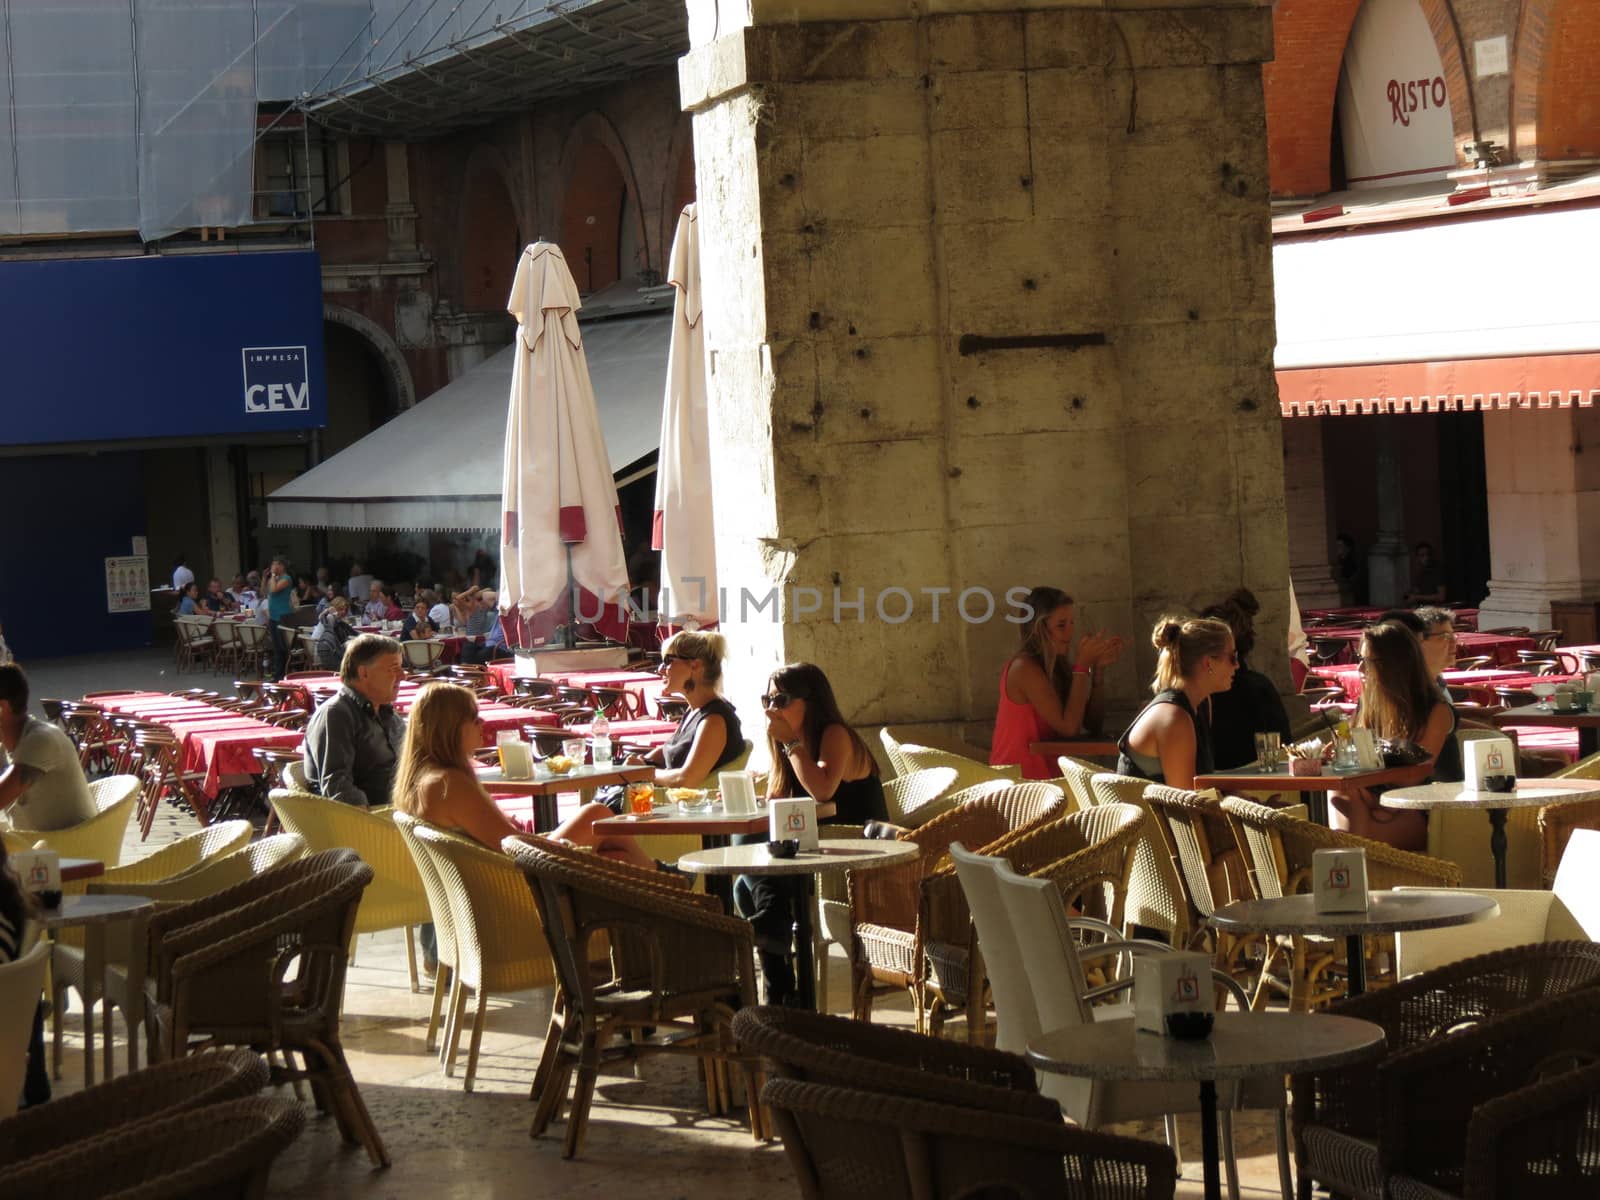 customers at an outdoor cafe by paolo77